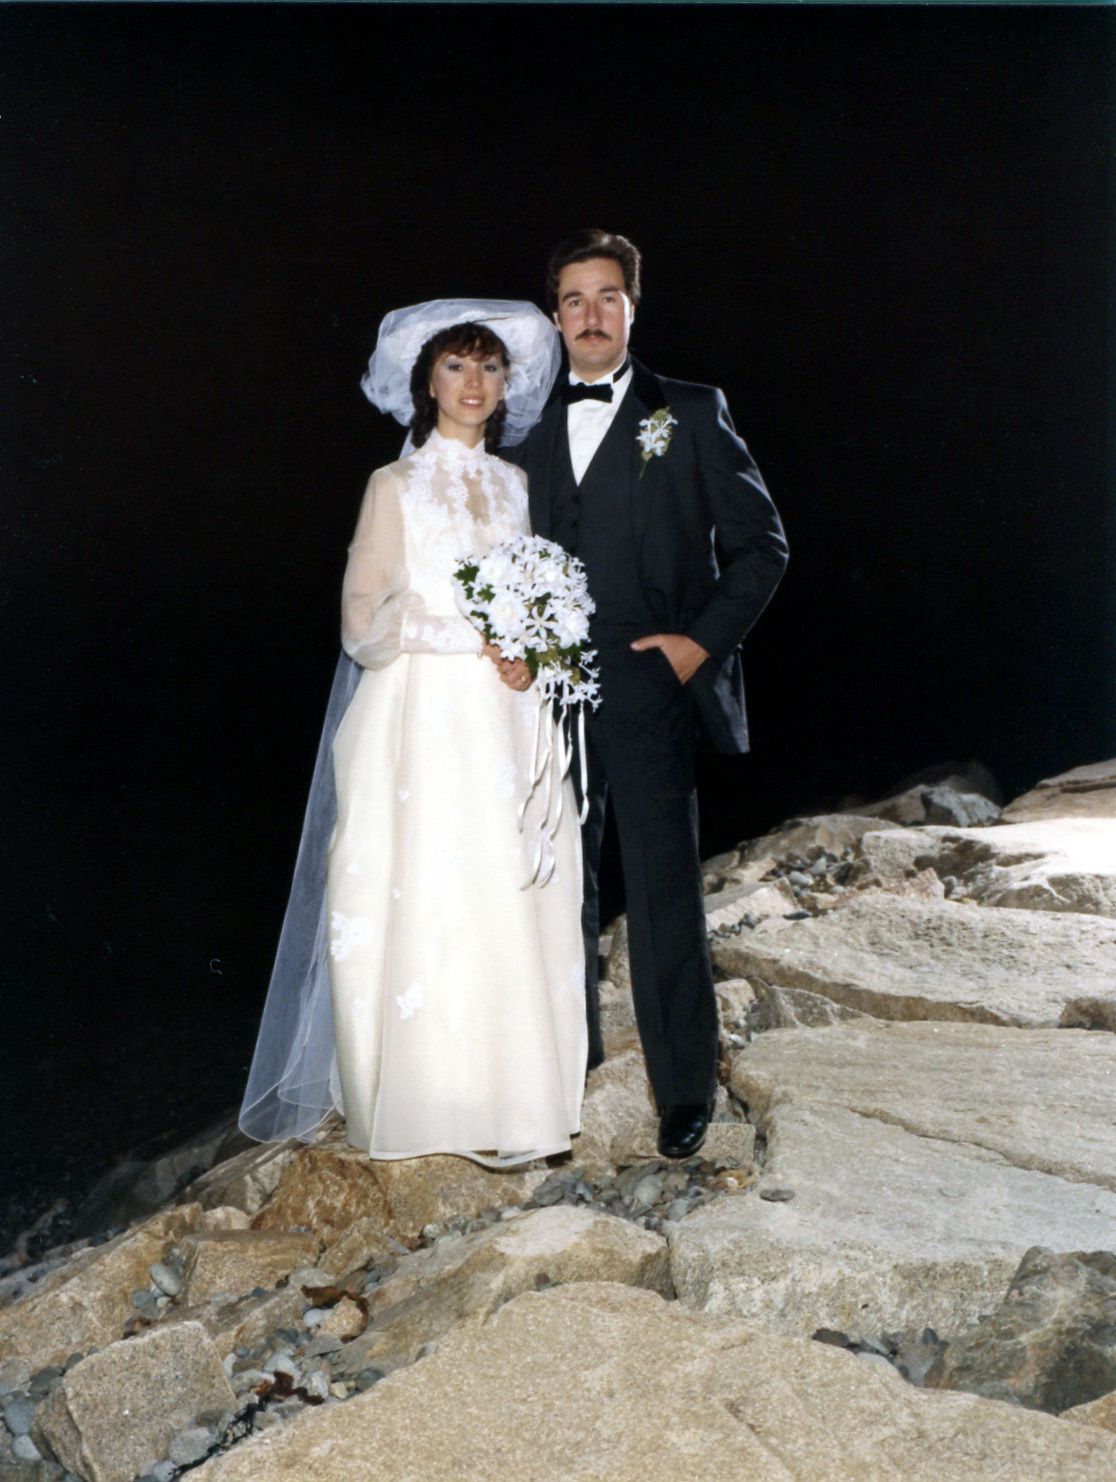 On April 23,, 1982 in Marblehead, MA  A Beautiful Wedding in Florida's founder's Charmaine & George Sr. were married. A reception was held at the Oceanview Country Club in Nahant, MA.